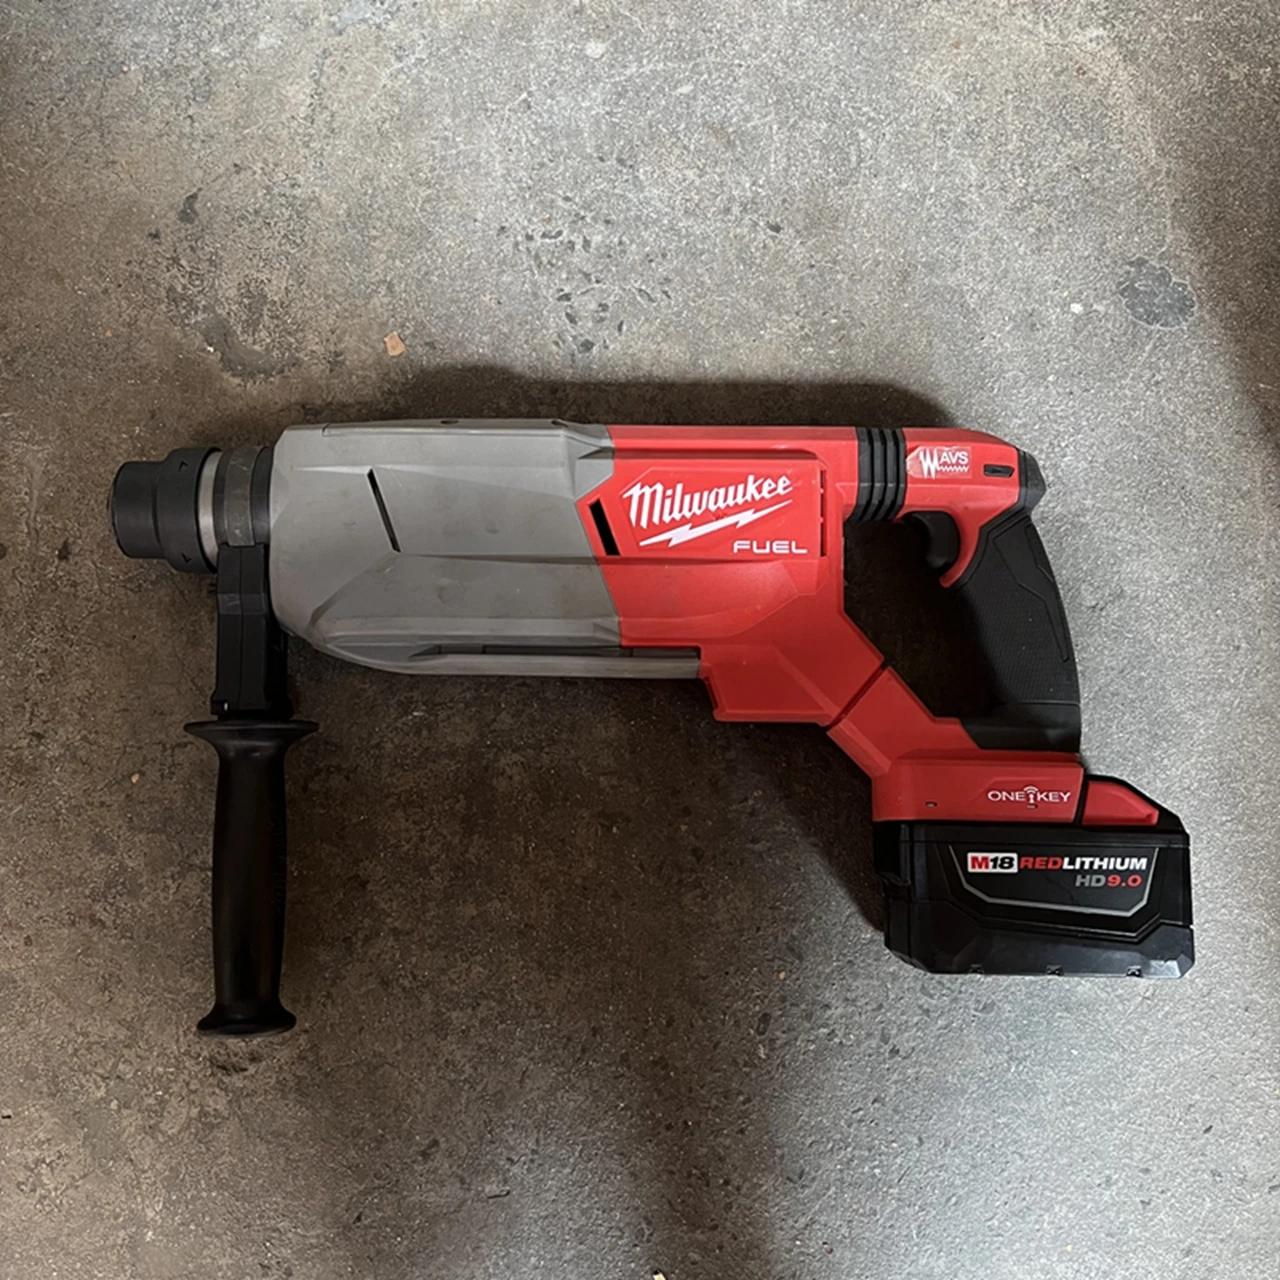 

Milwaukee 2916-20 M18 FUEL 1-1/4" SDS Plus D-Handle Rotary Hammer w/ ONE-KEY Includes 9.0AH lithium battery second-hand